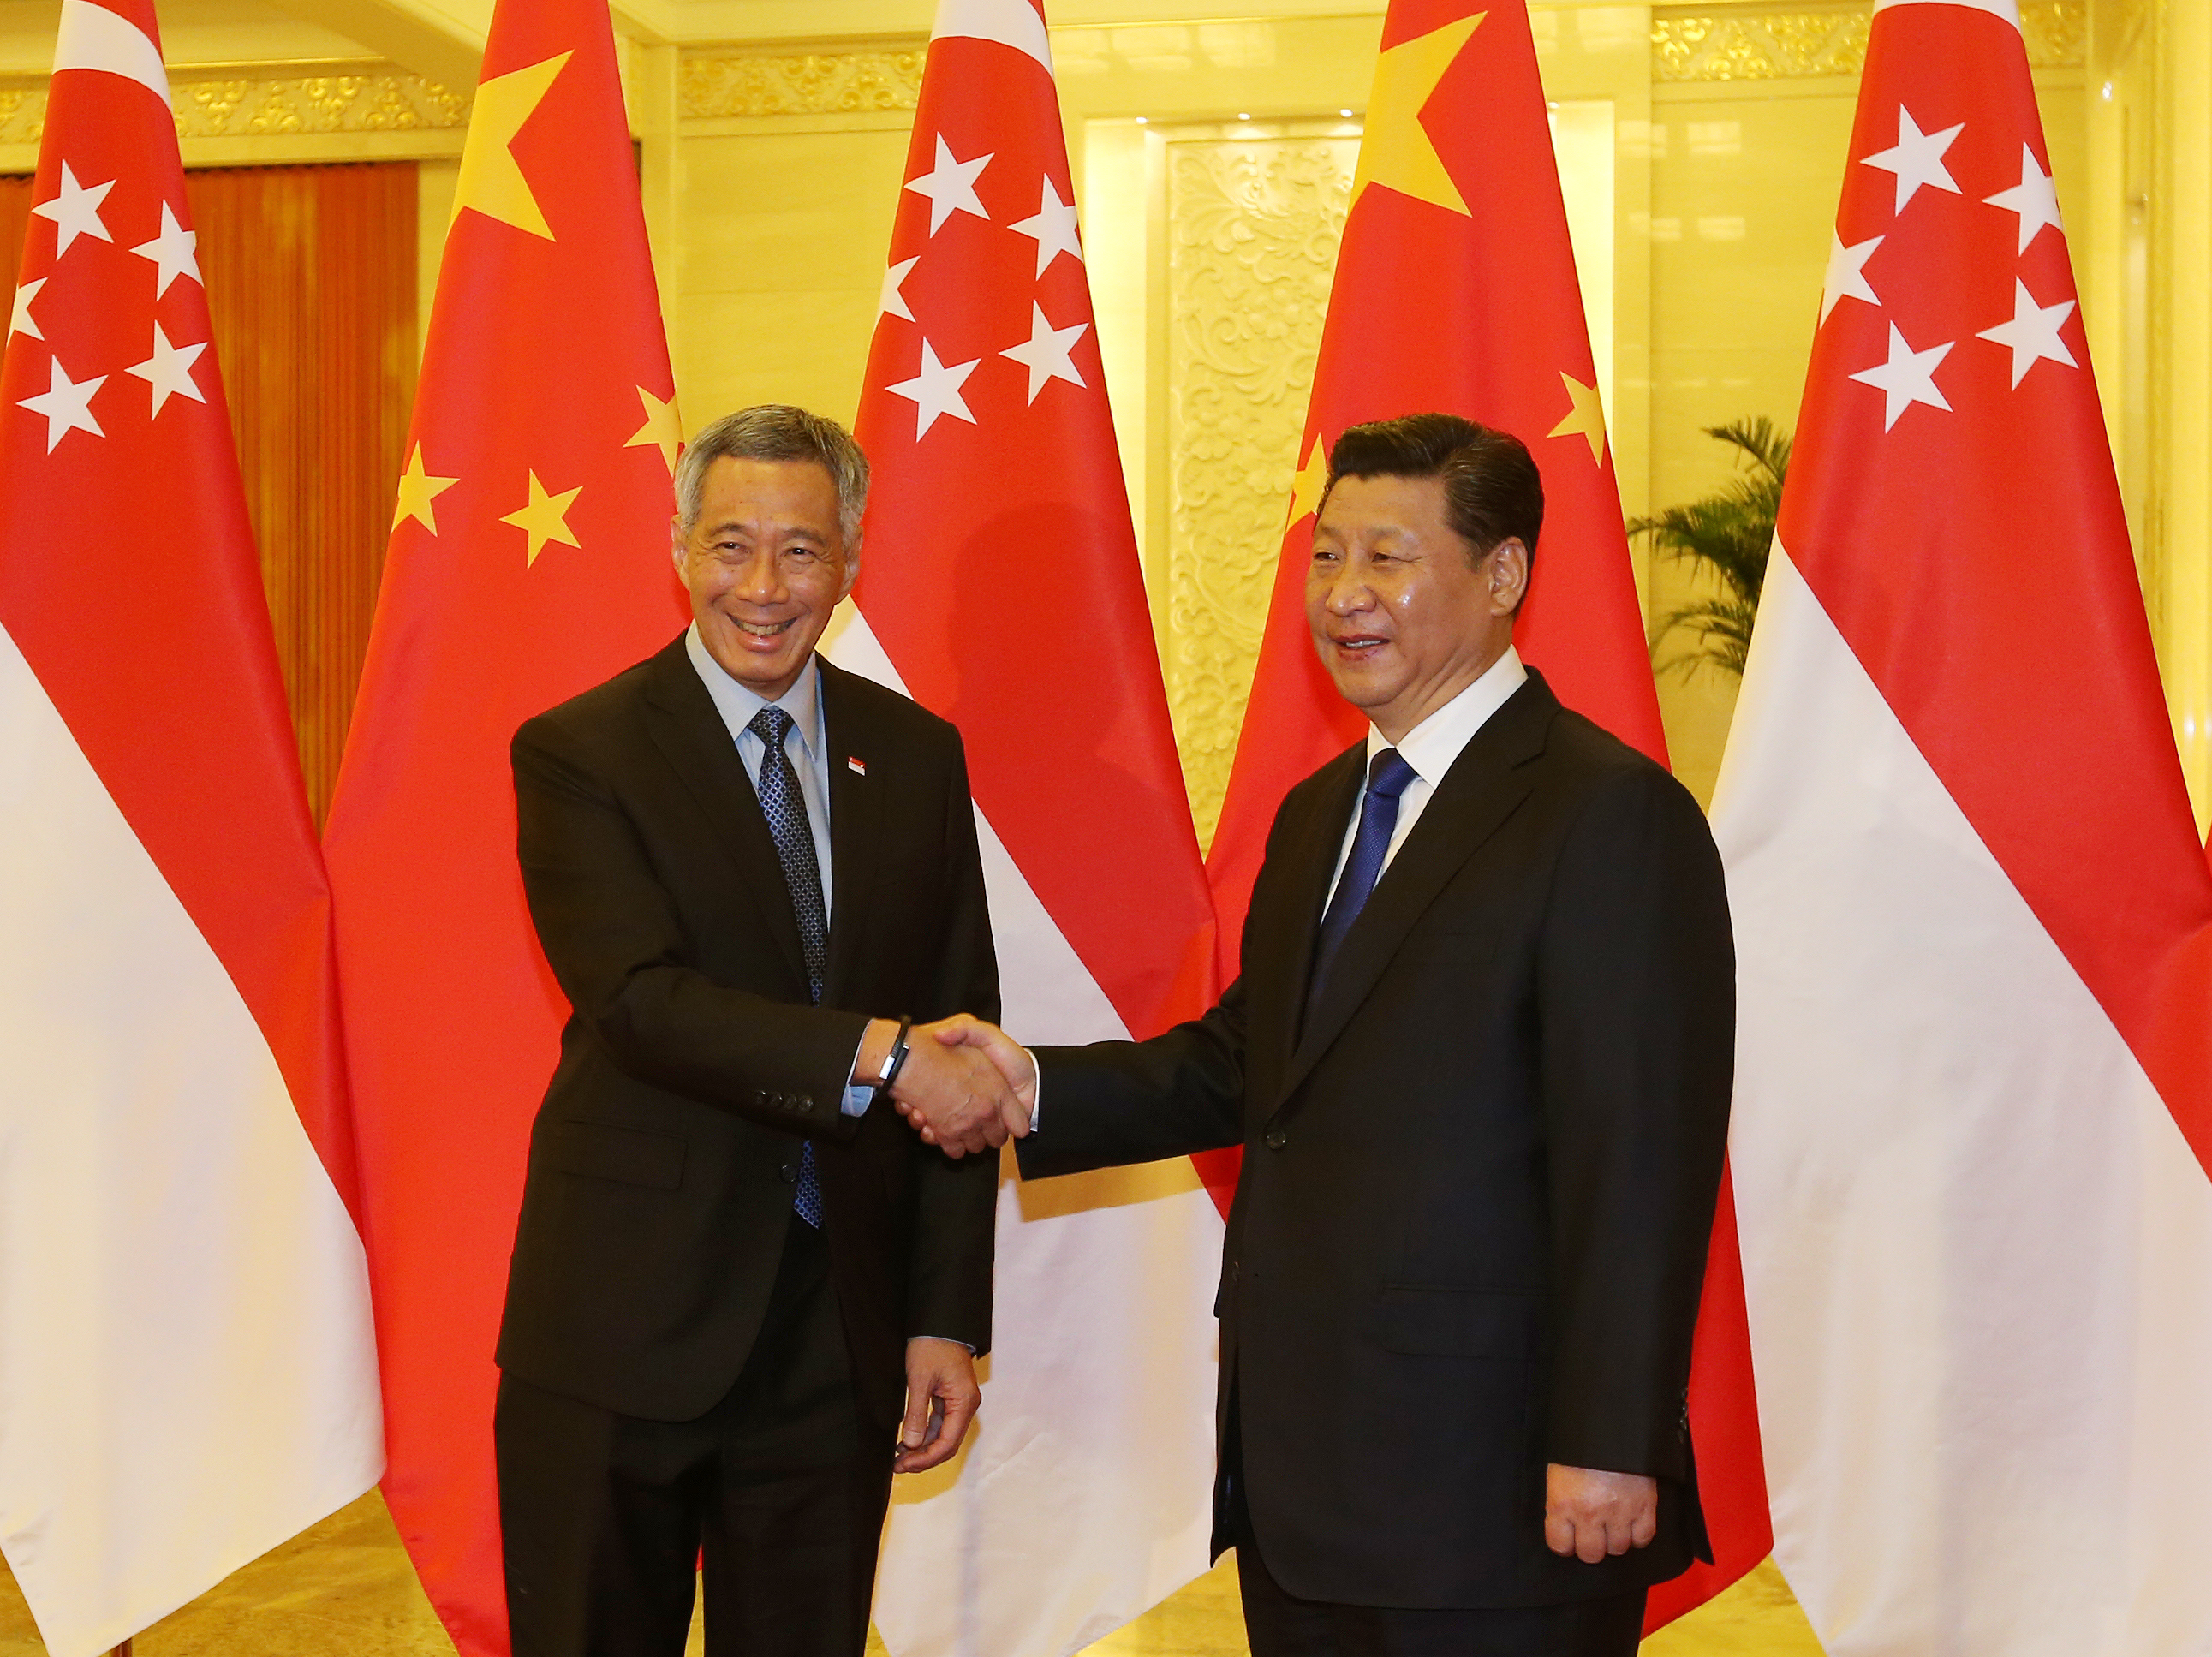 Prime Minister meeting PRC President Xi Jinping at the Great Hall of the People, Beijing, China on 9 Nov 2014 (LHZB Photo © Singapore Press Holdings Limited) 